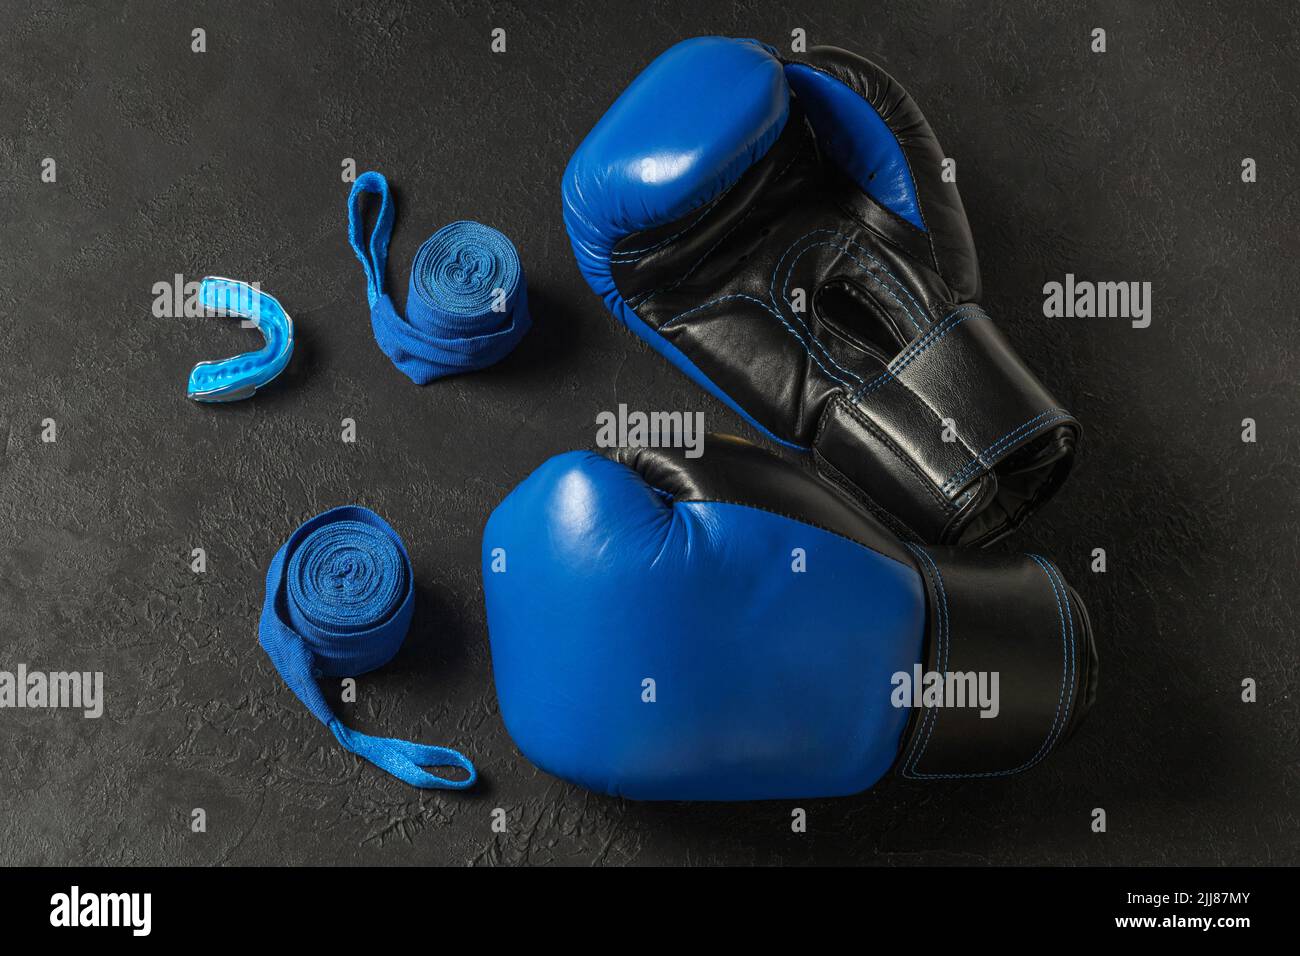 Blue boxing gloves with a cap and bandages on a black background. Stock Photo